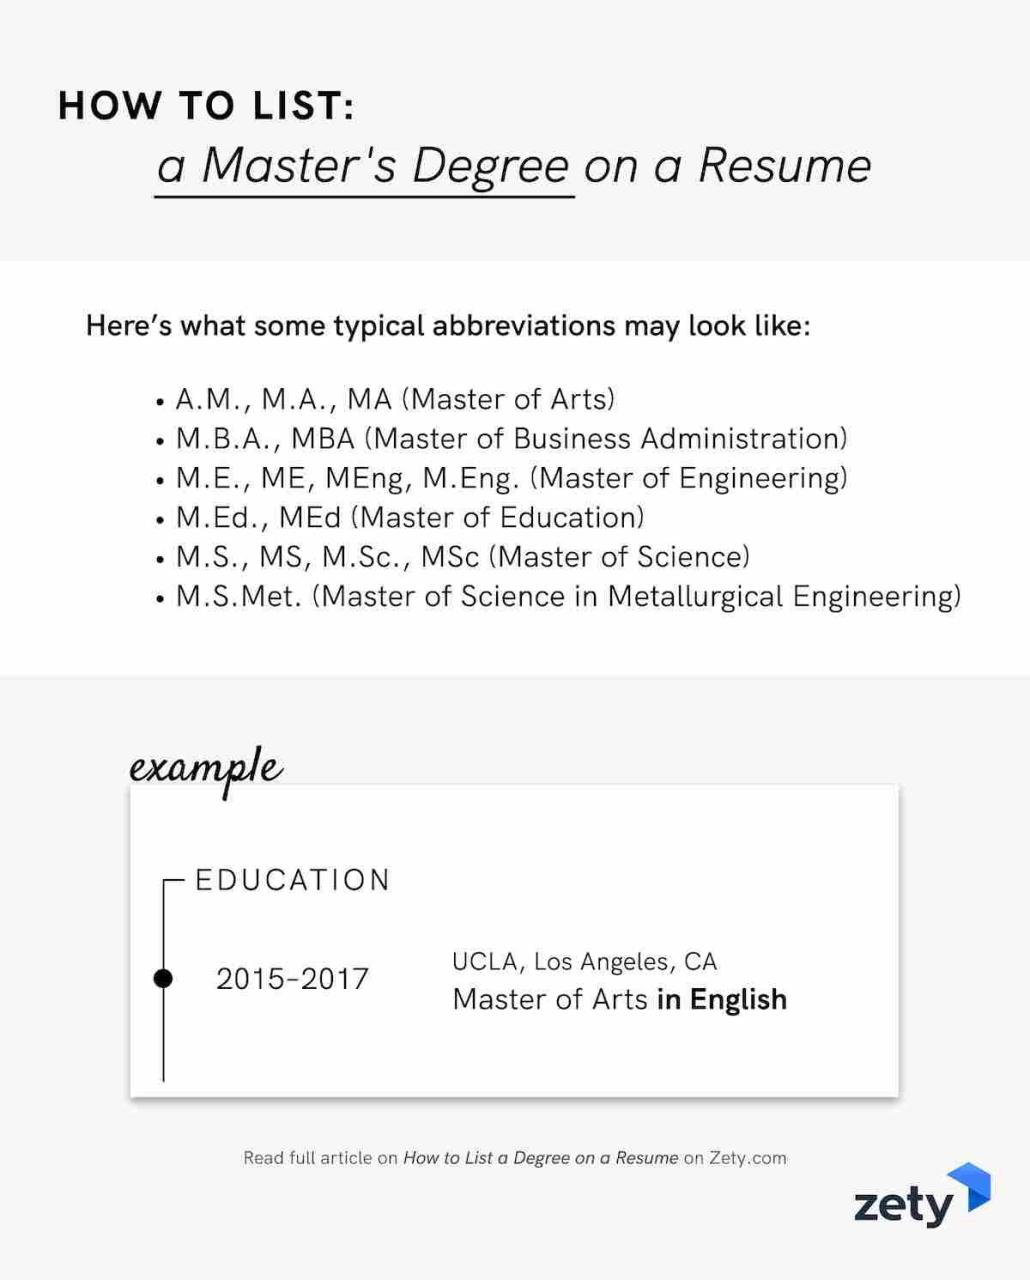 How to List a Degree on a Resume [Associate, Bachelor’s & Master’s]